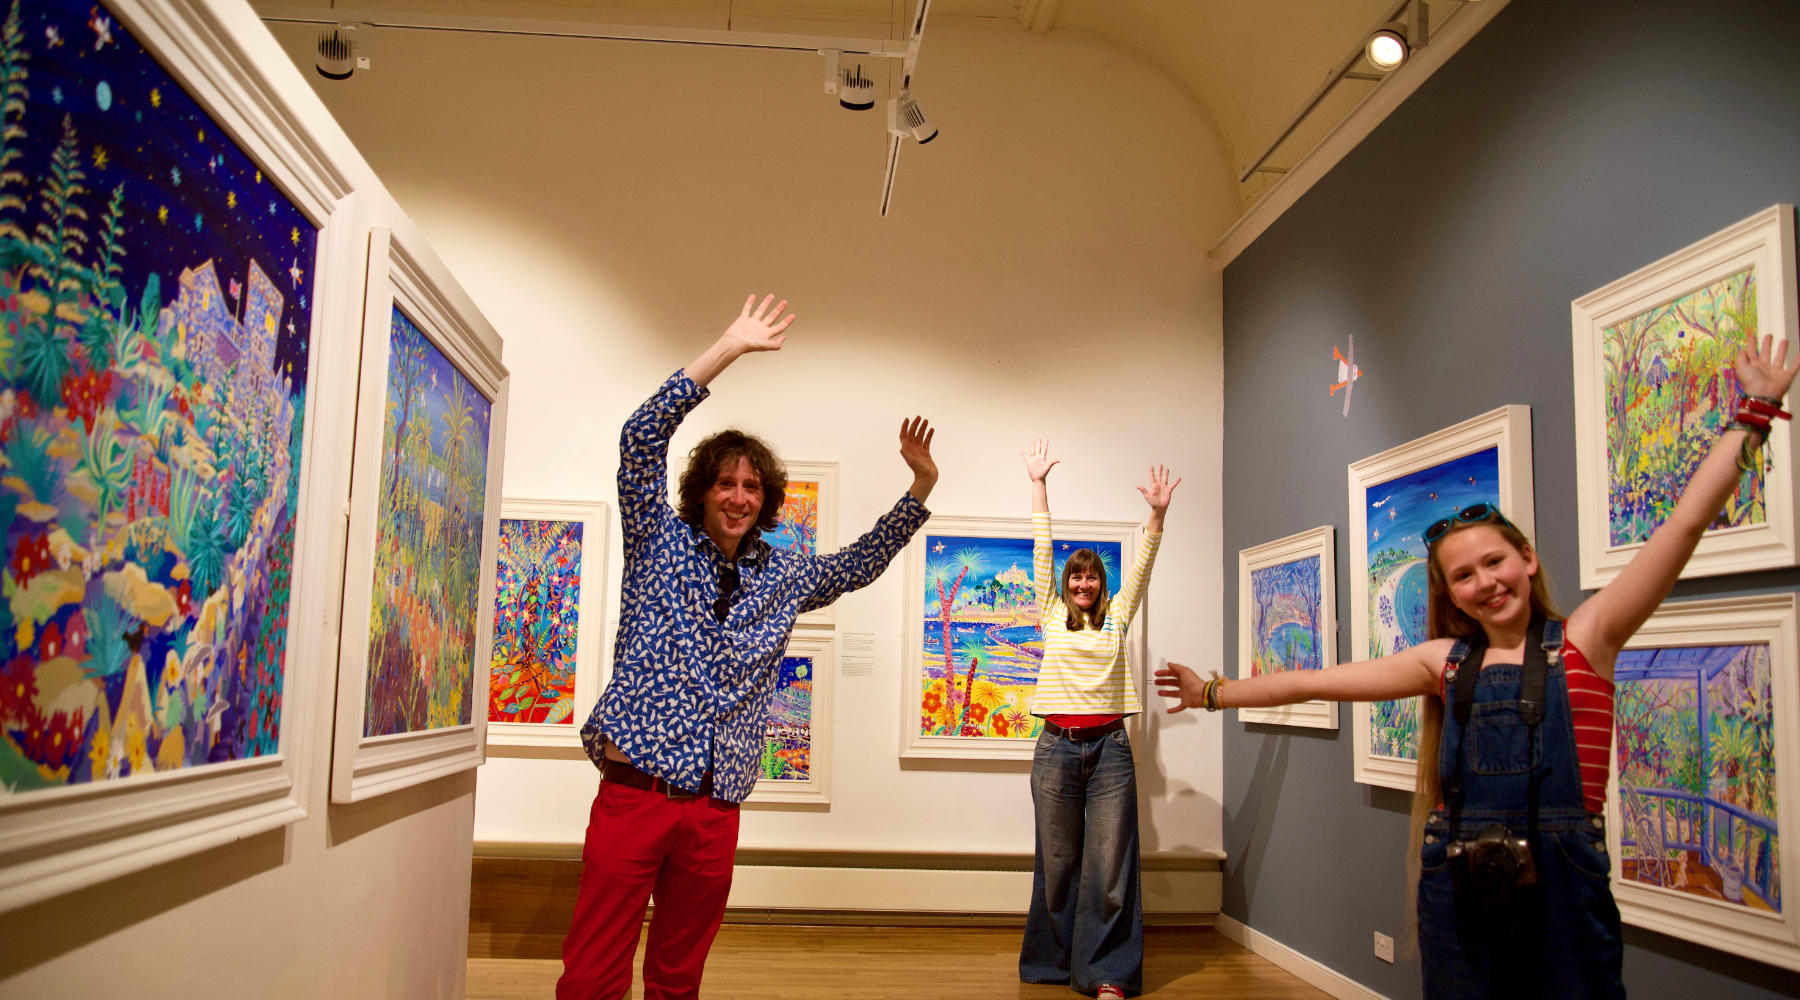 John Dyer, Joanne Short and Wilamena Dyer at Falmouth Art Gallery